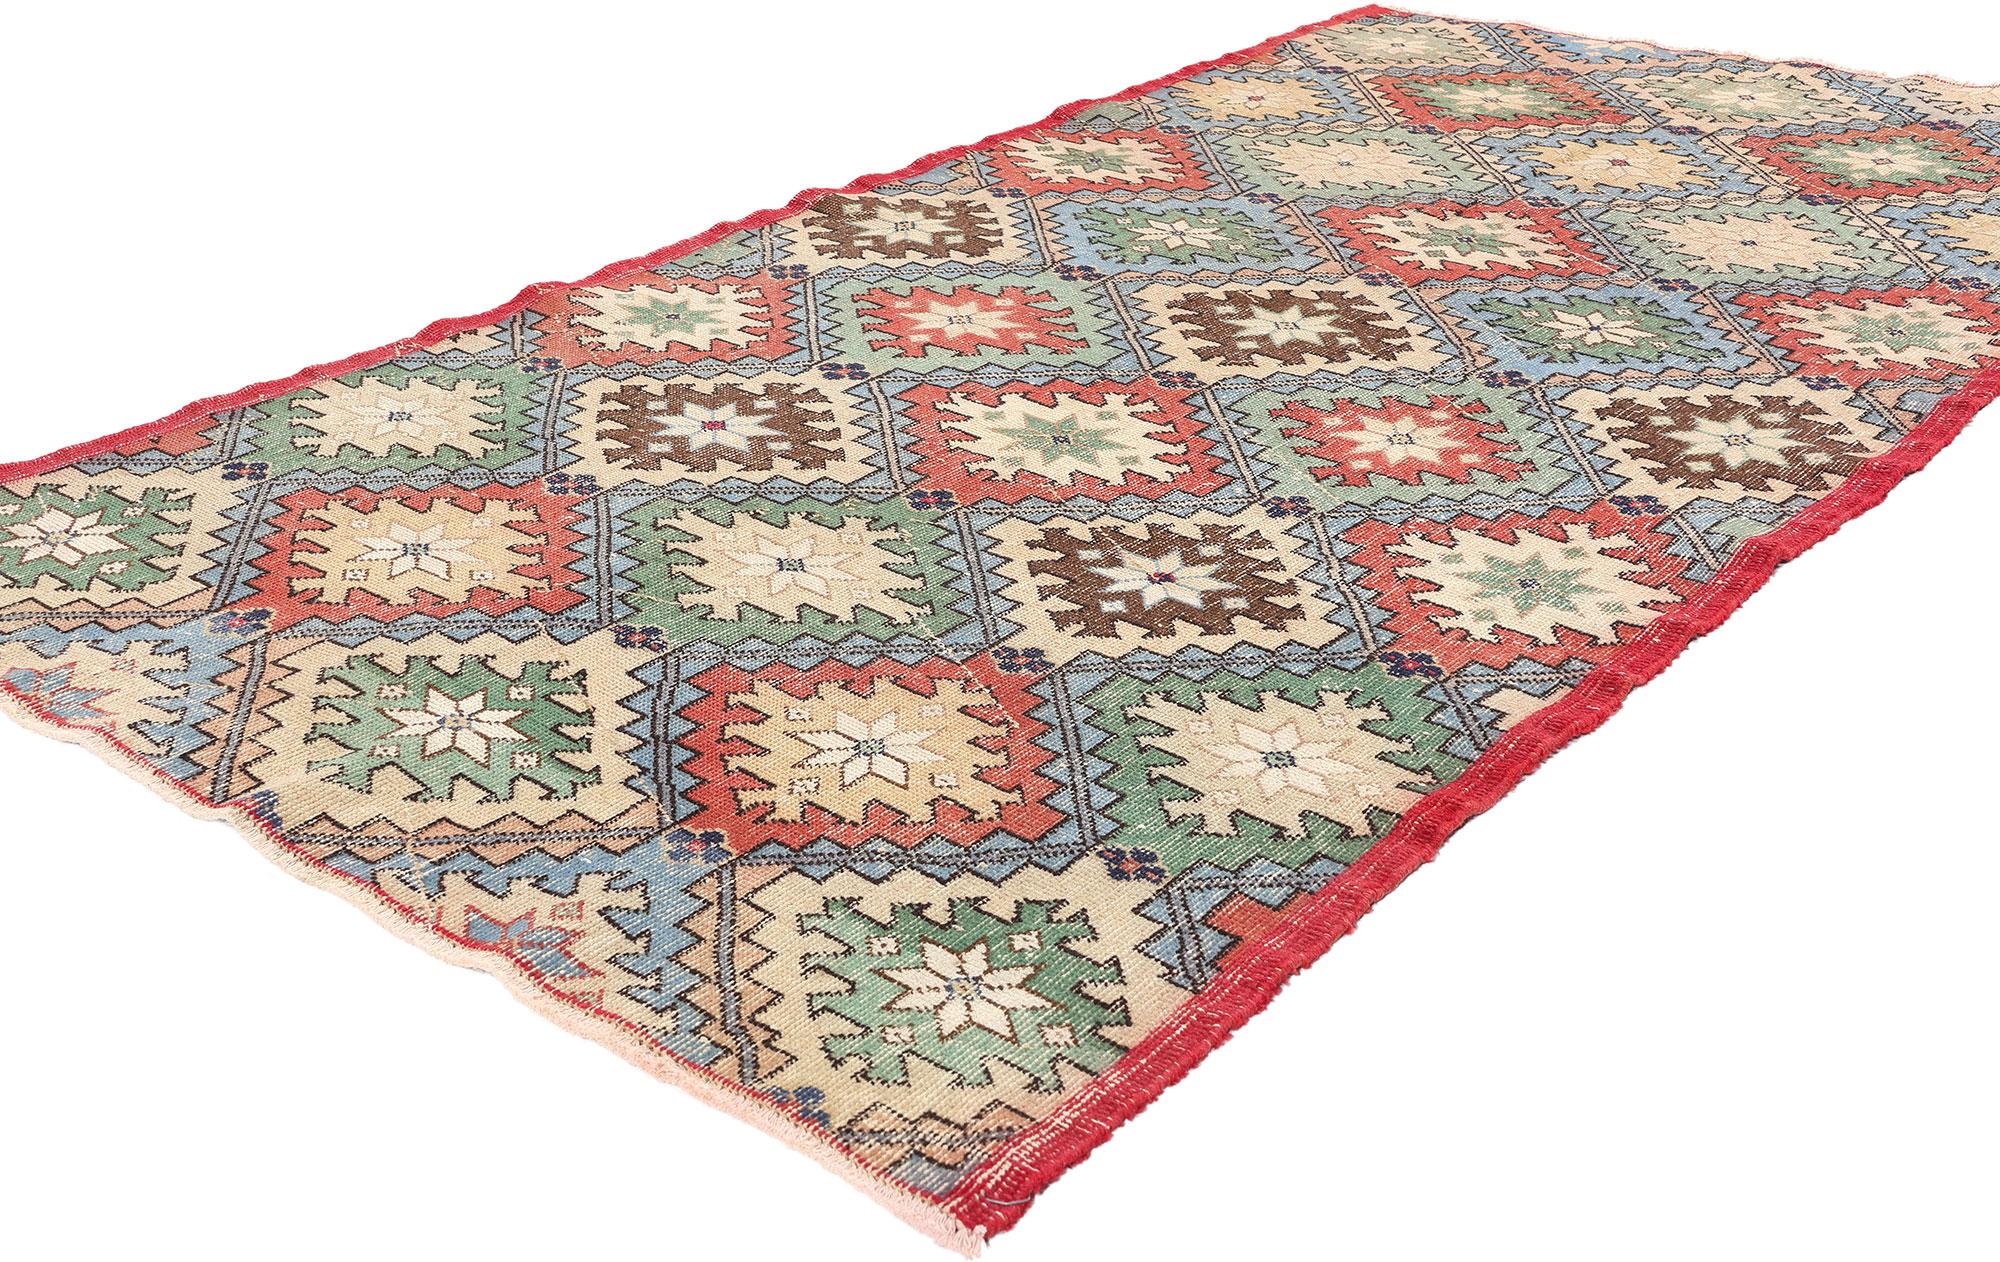 51996 Distressed Vintage Turkish Sivas Rug, 04'02 x 07'07. Originating from Sivas in central Anatolia, Turkey, distressed Turkish Sivas rugs undergo intentional aging processes such as distressing to achieve a weathered aesthetic. These Sivas rugs